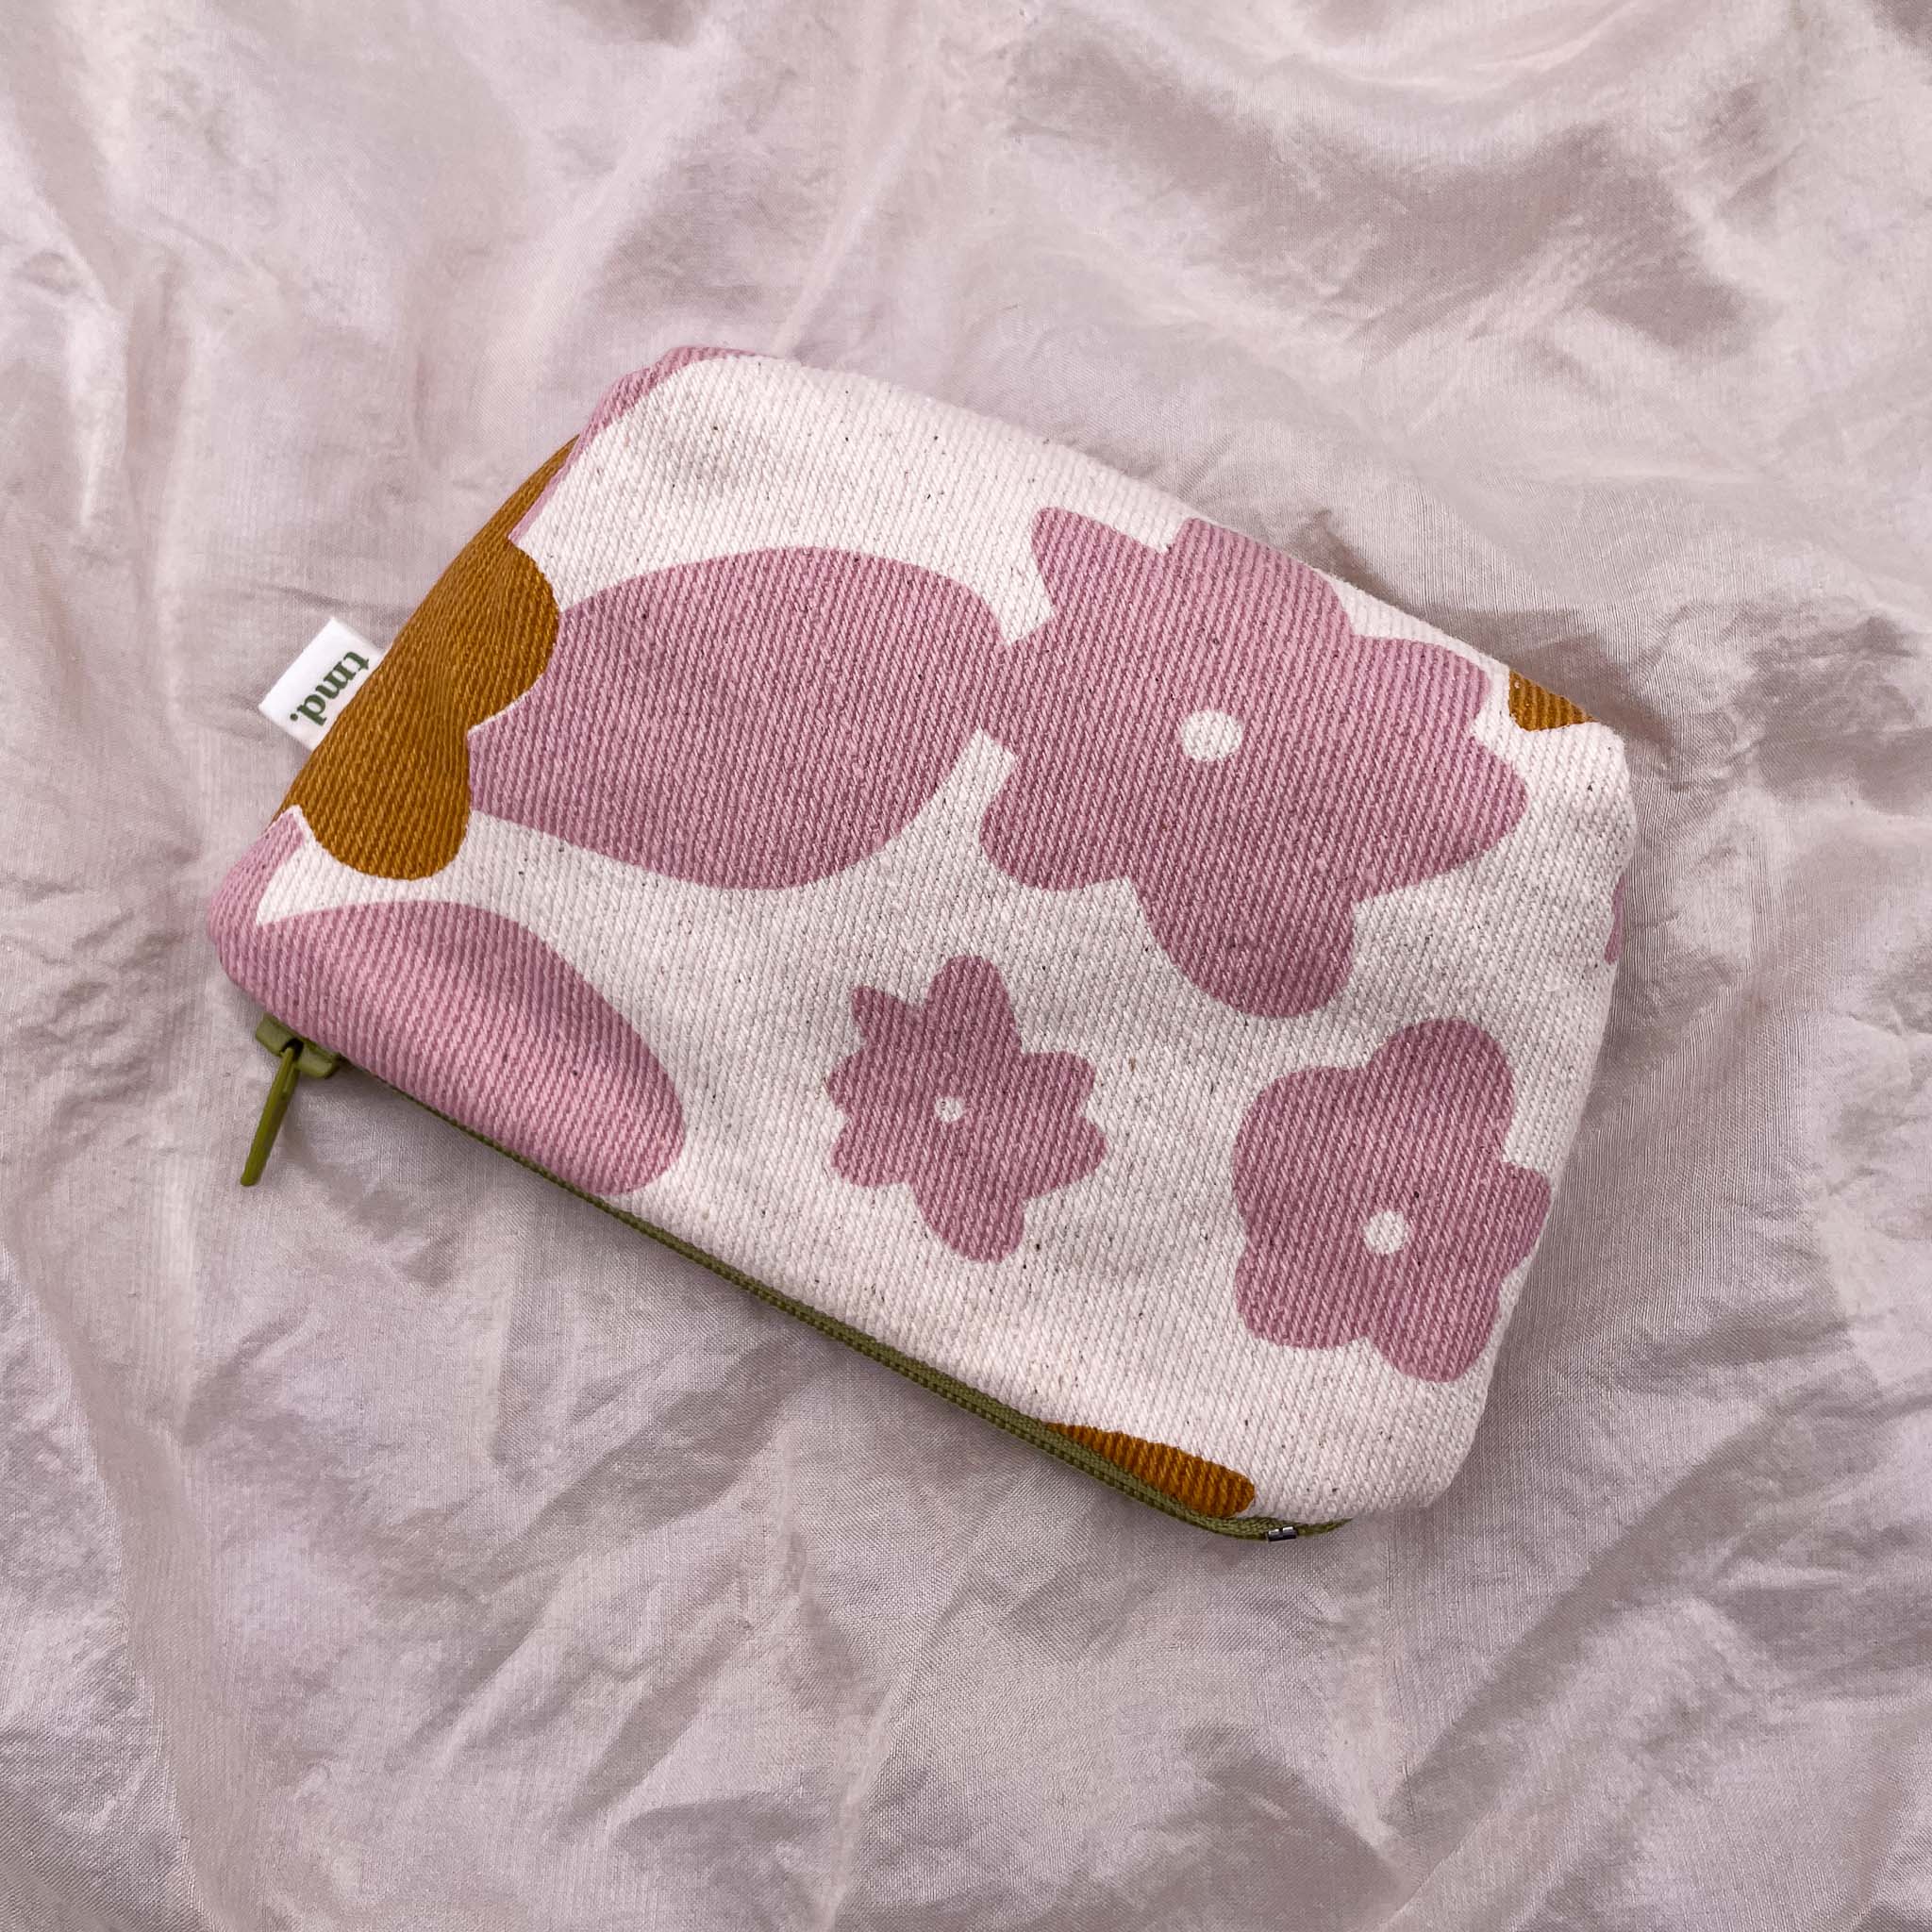 Little Bag - Abstract Floral in Dusty Pink and Ochre on Denim